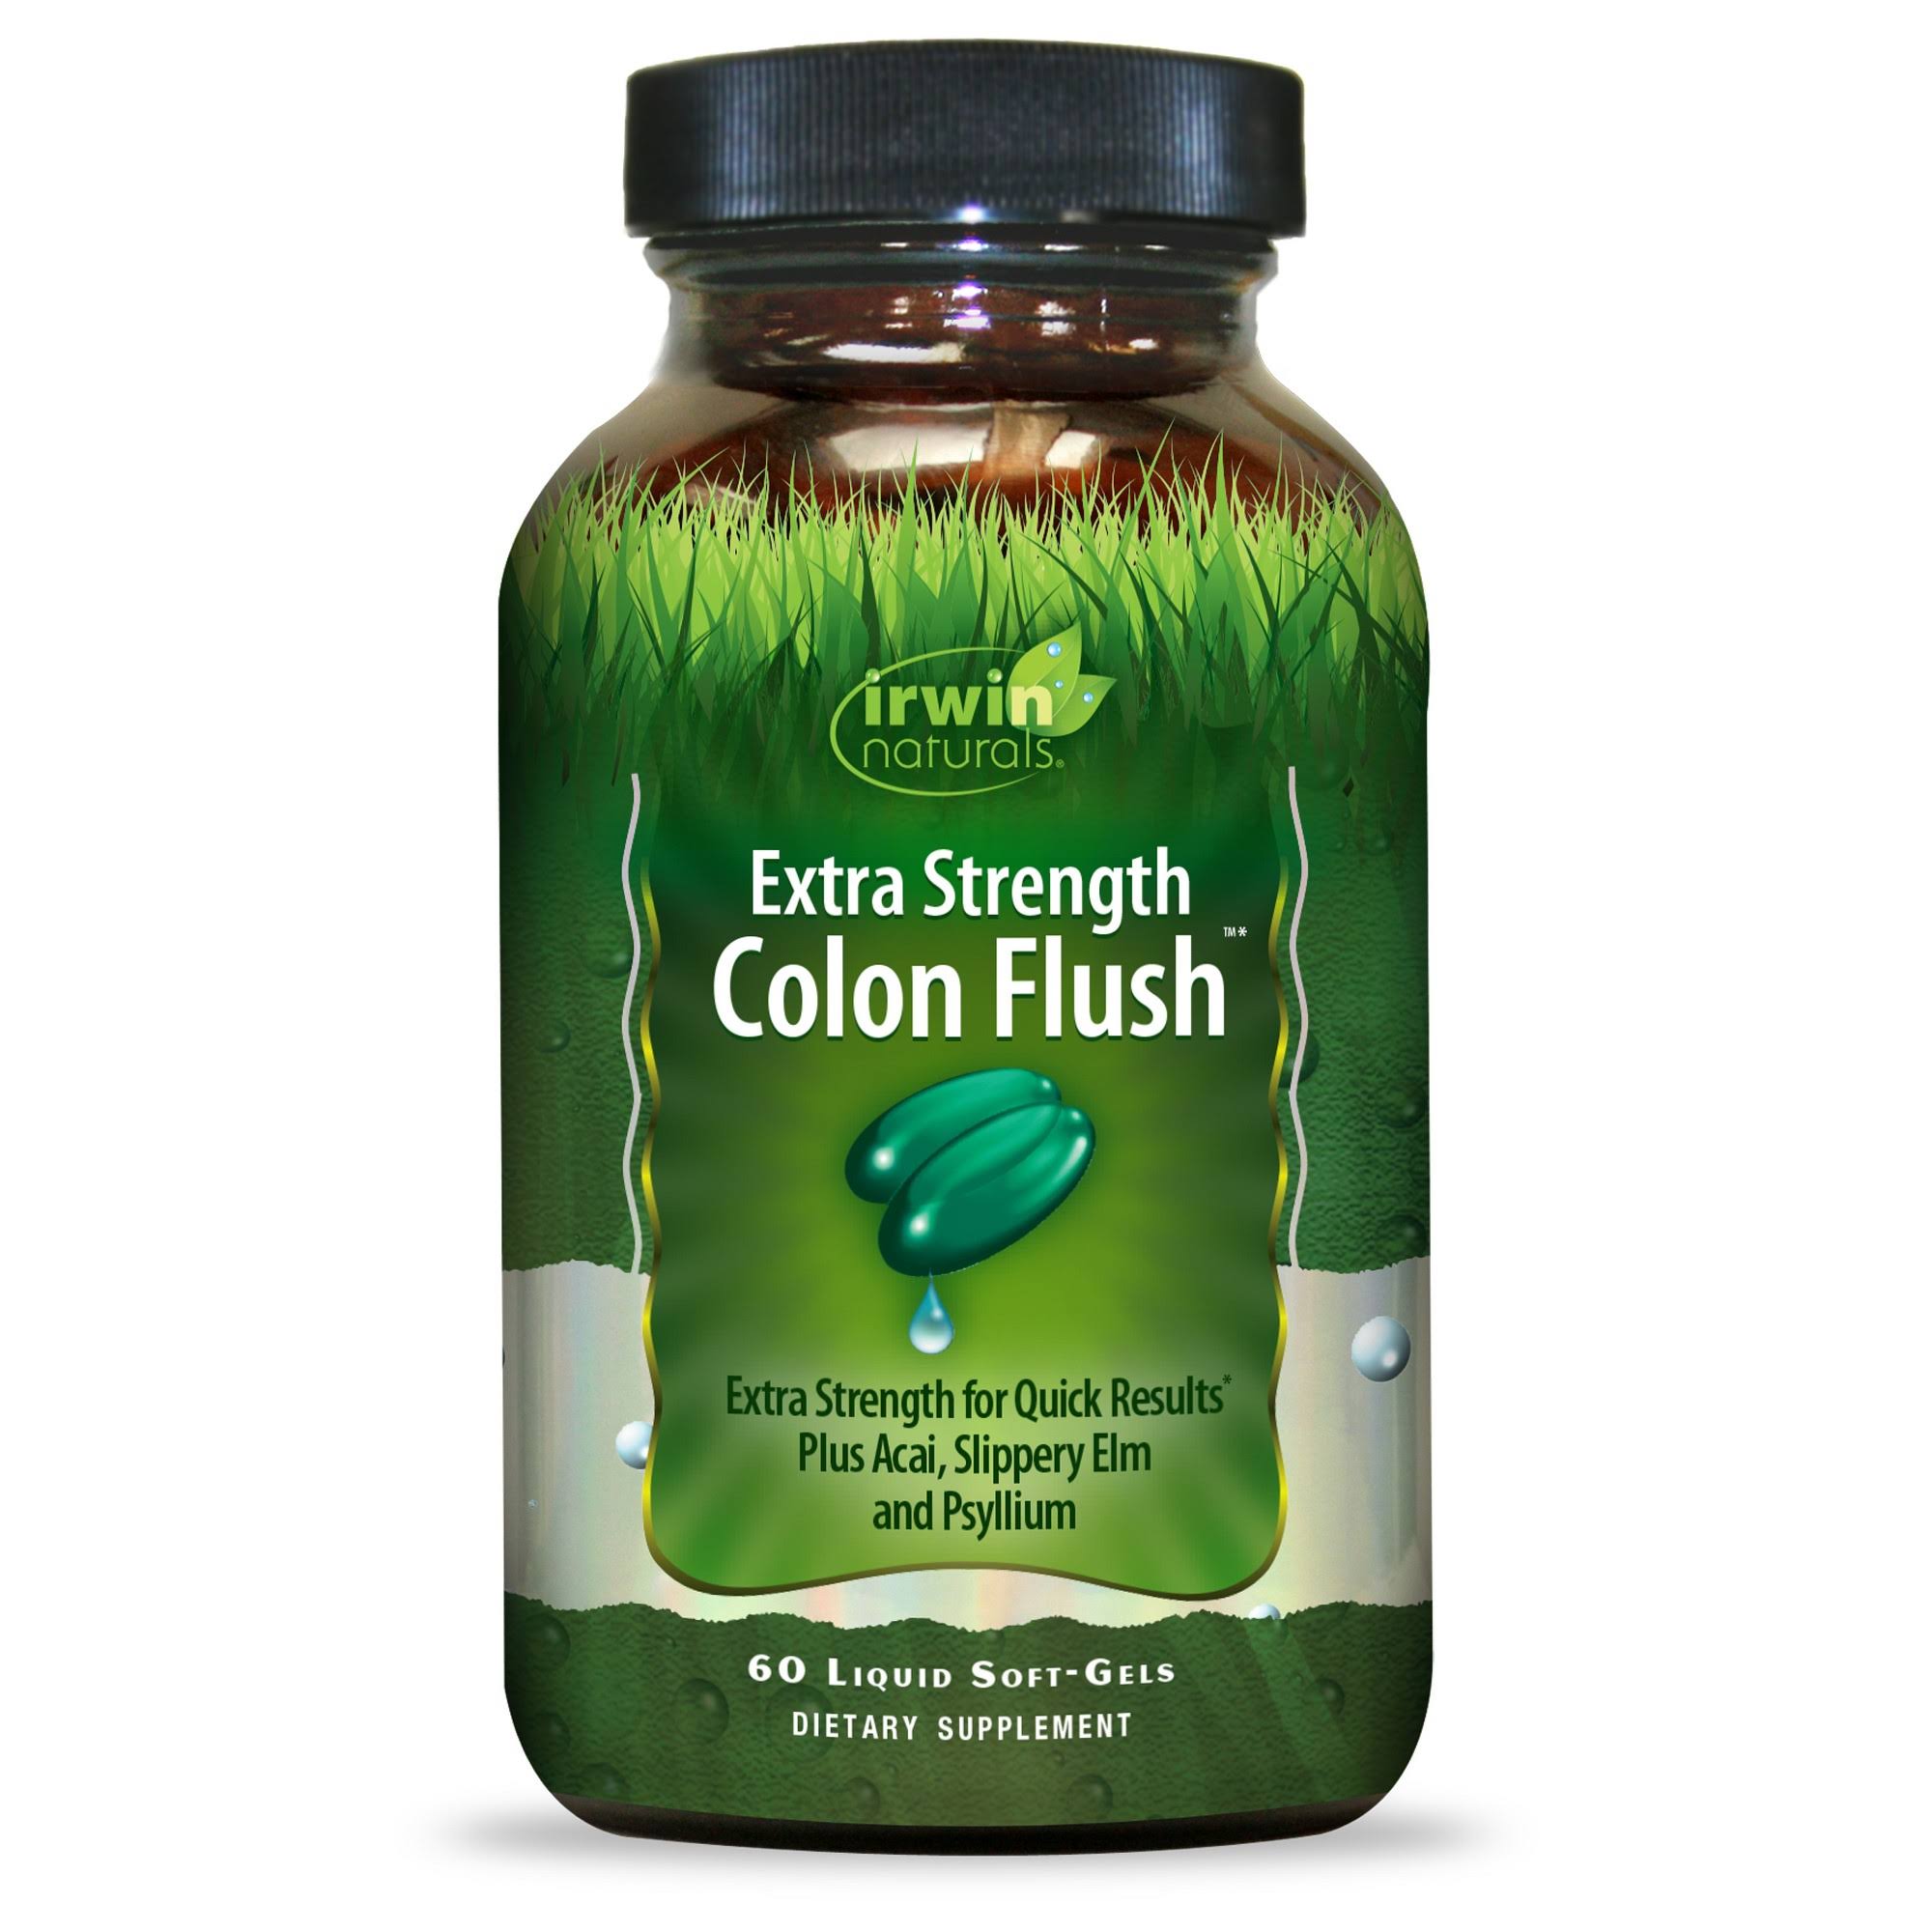 Irwin Naturals Extra Strength Colon Flush Supplement - 60 Count